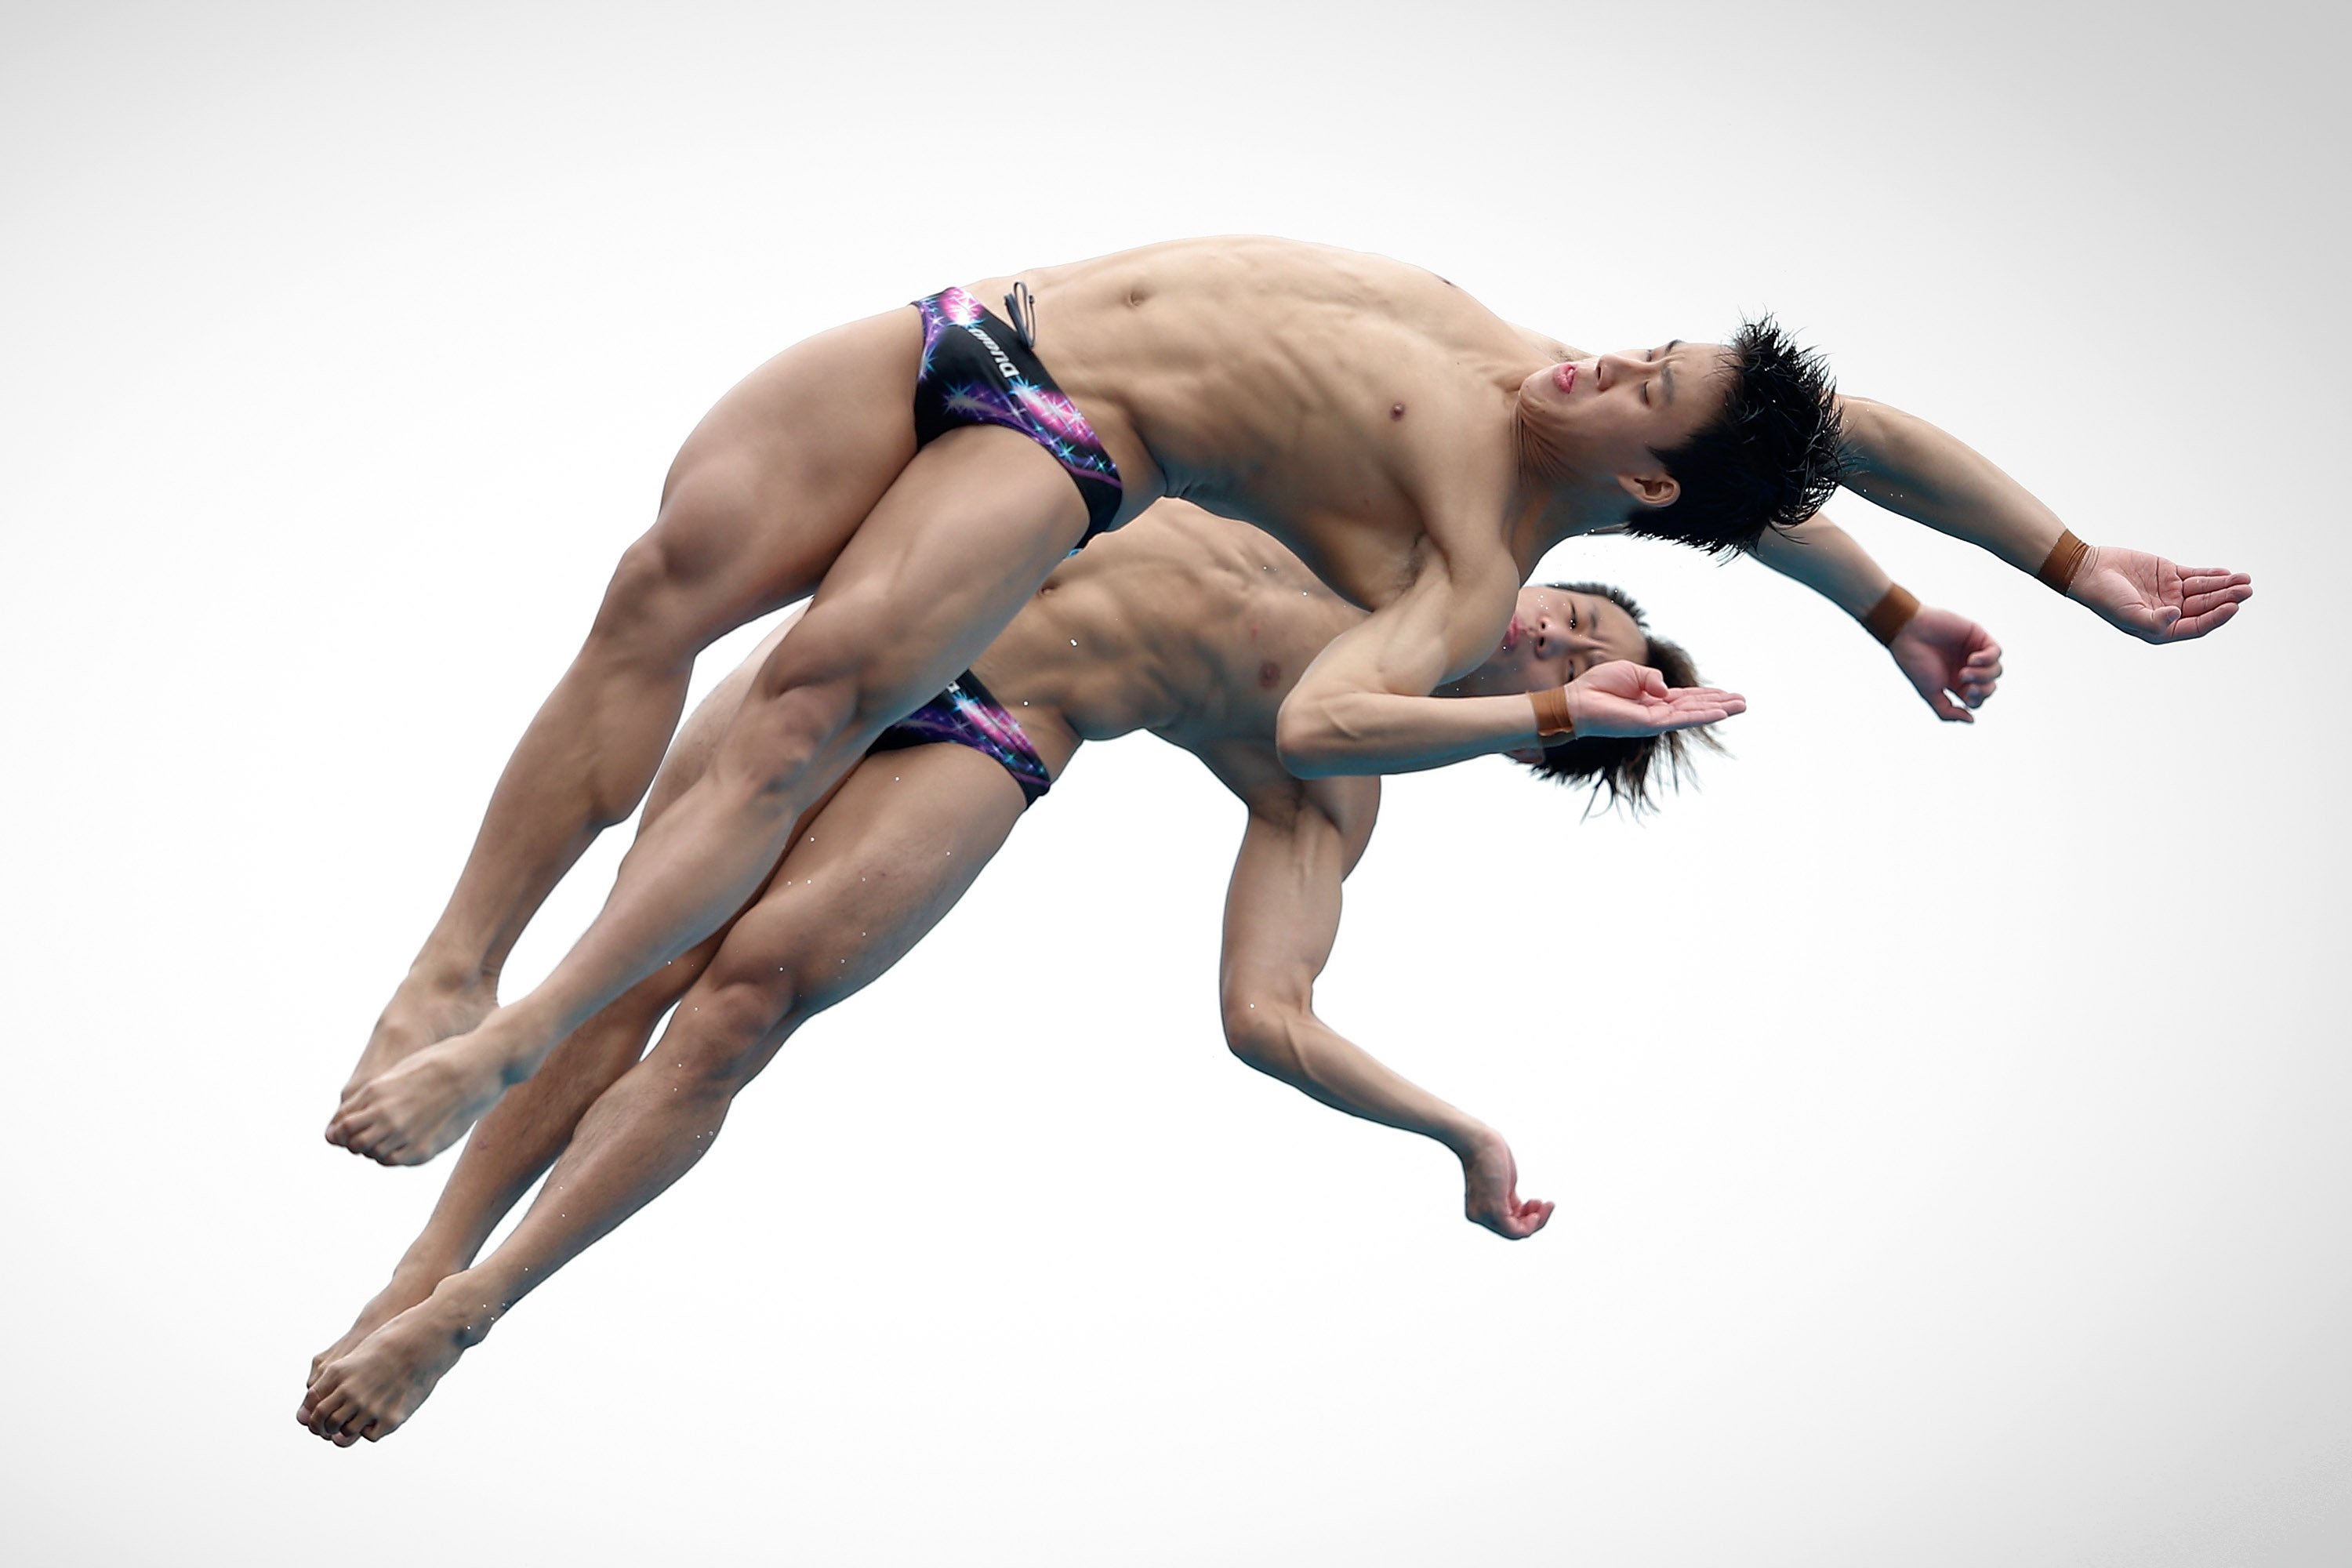 Lin Yue and Cao Yuan of China compete in the men's 10M Synchro Springboard Preliminary on day two of the 19th FINA Diving World Cup at the Oriental Sports Center in Shanghai on July 16, 2014.